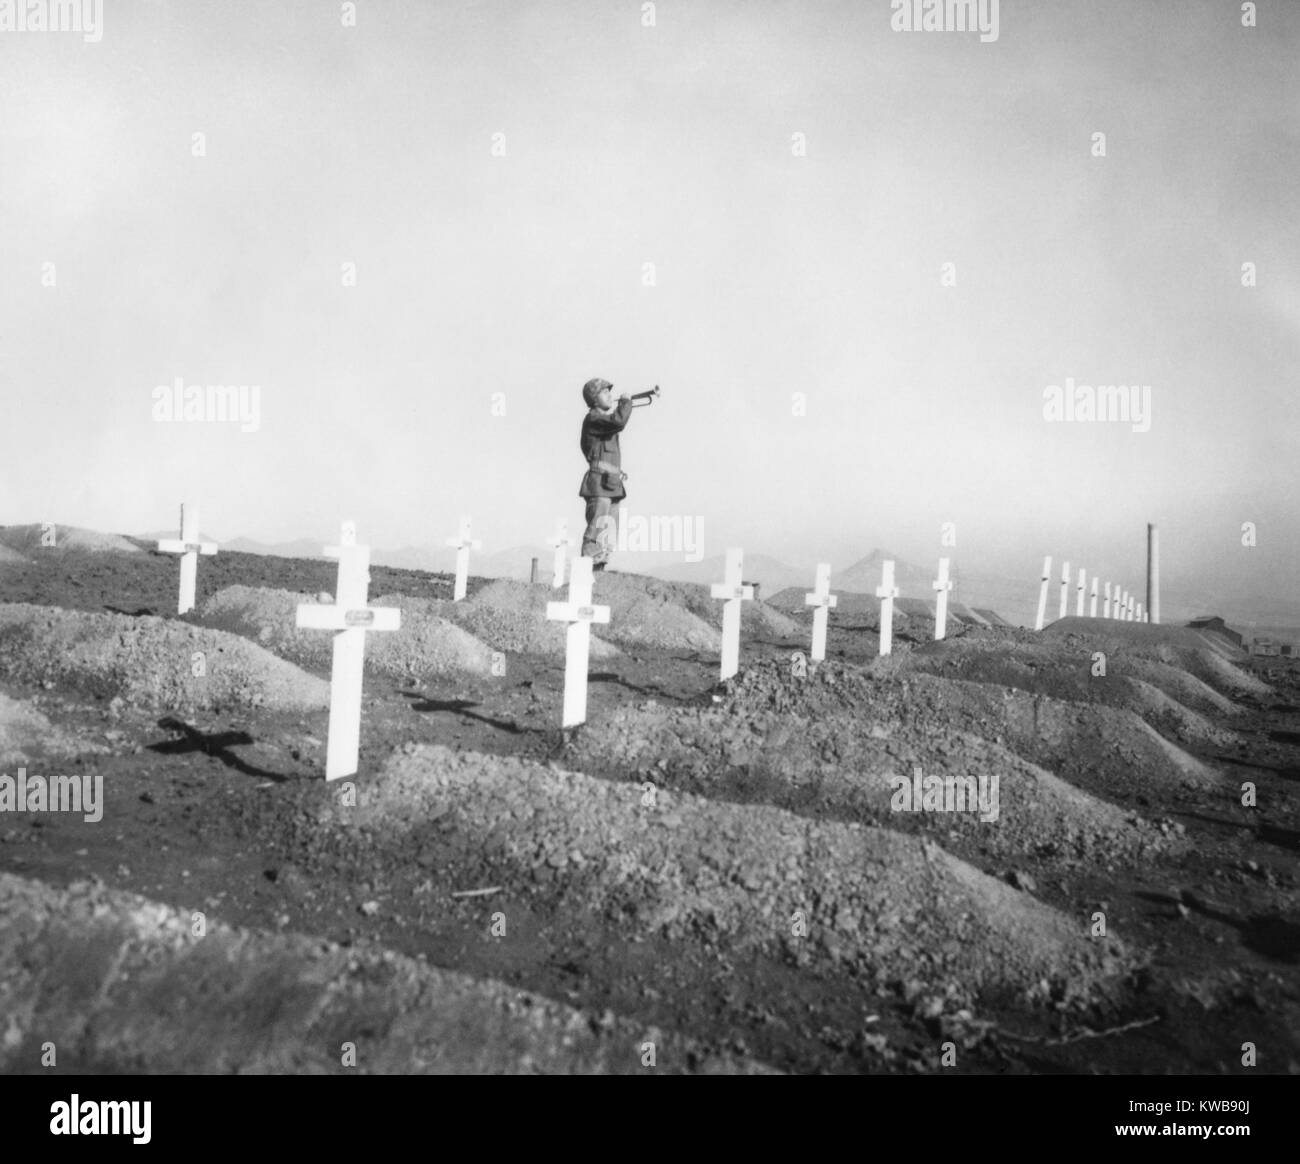 U.S. Marine plays 'Taps' over the graves of fallen Leathernecks during memorial services. The First Marine Division dead were brought from Chosin Reservoir to be buried in the cemetery at Hungnam, Korea. Dec. 13, 1950. Korean War, 1950-53. (BSLOC_2014_11_207) Stock Photo